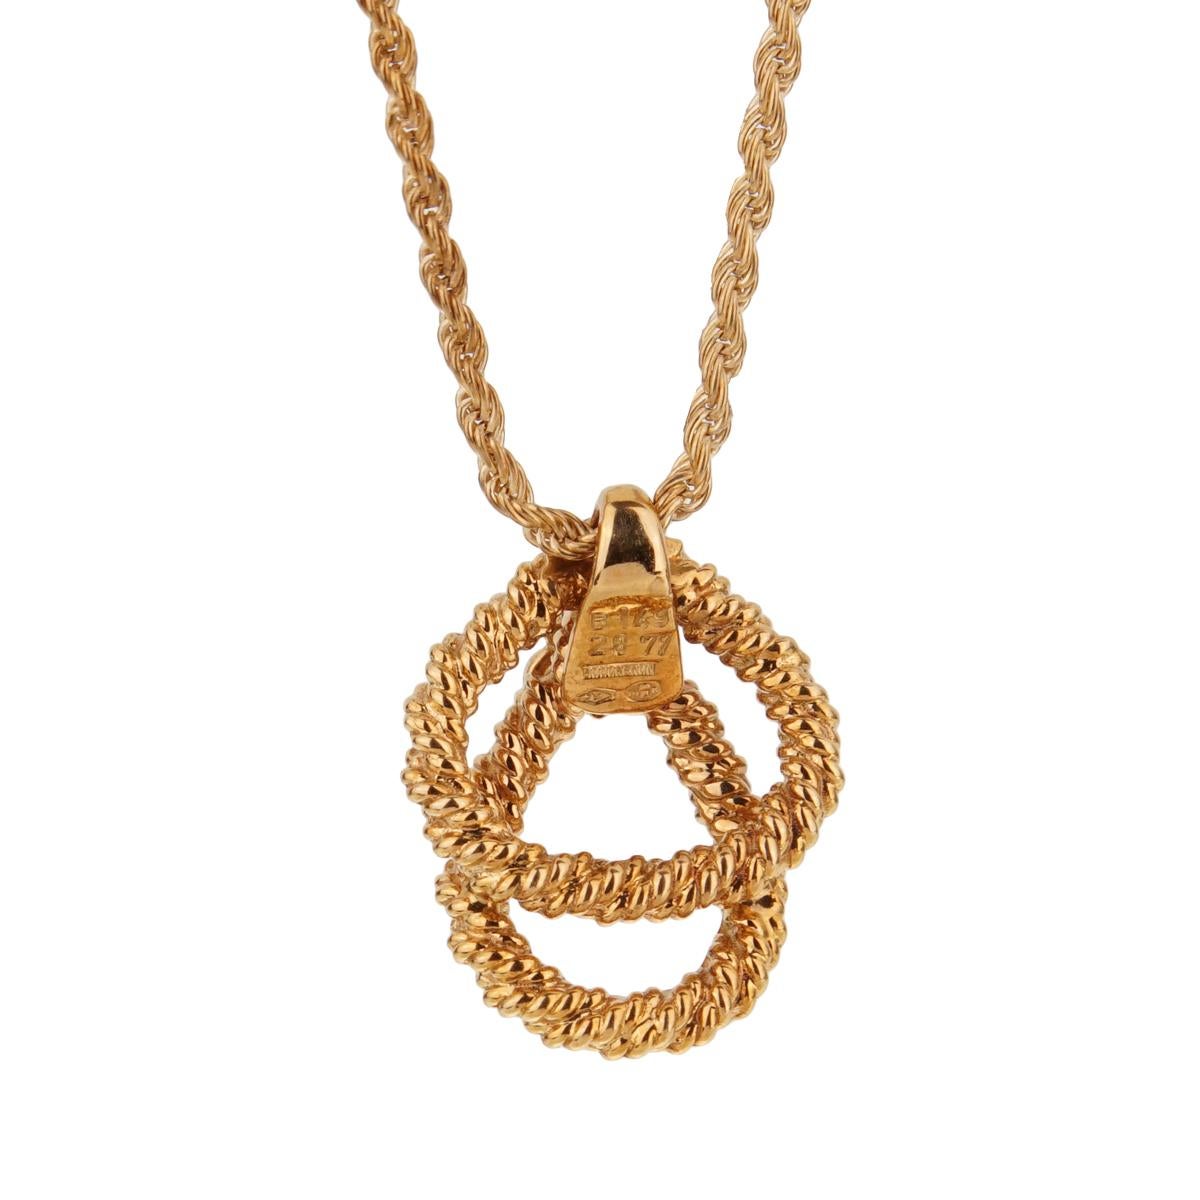 A magnificent Boucheron diamond pendant necklace featuring 3 round brilliant cut diamonds set in 18k yellow gold. The necklace is accompanied with a rope necklace by Boucheron.

Necklace length 17